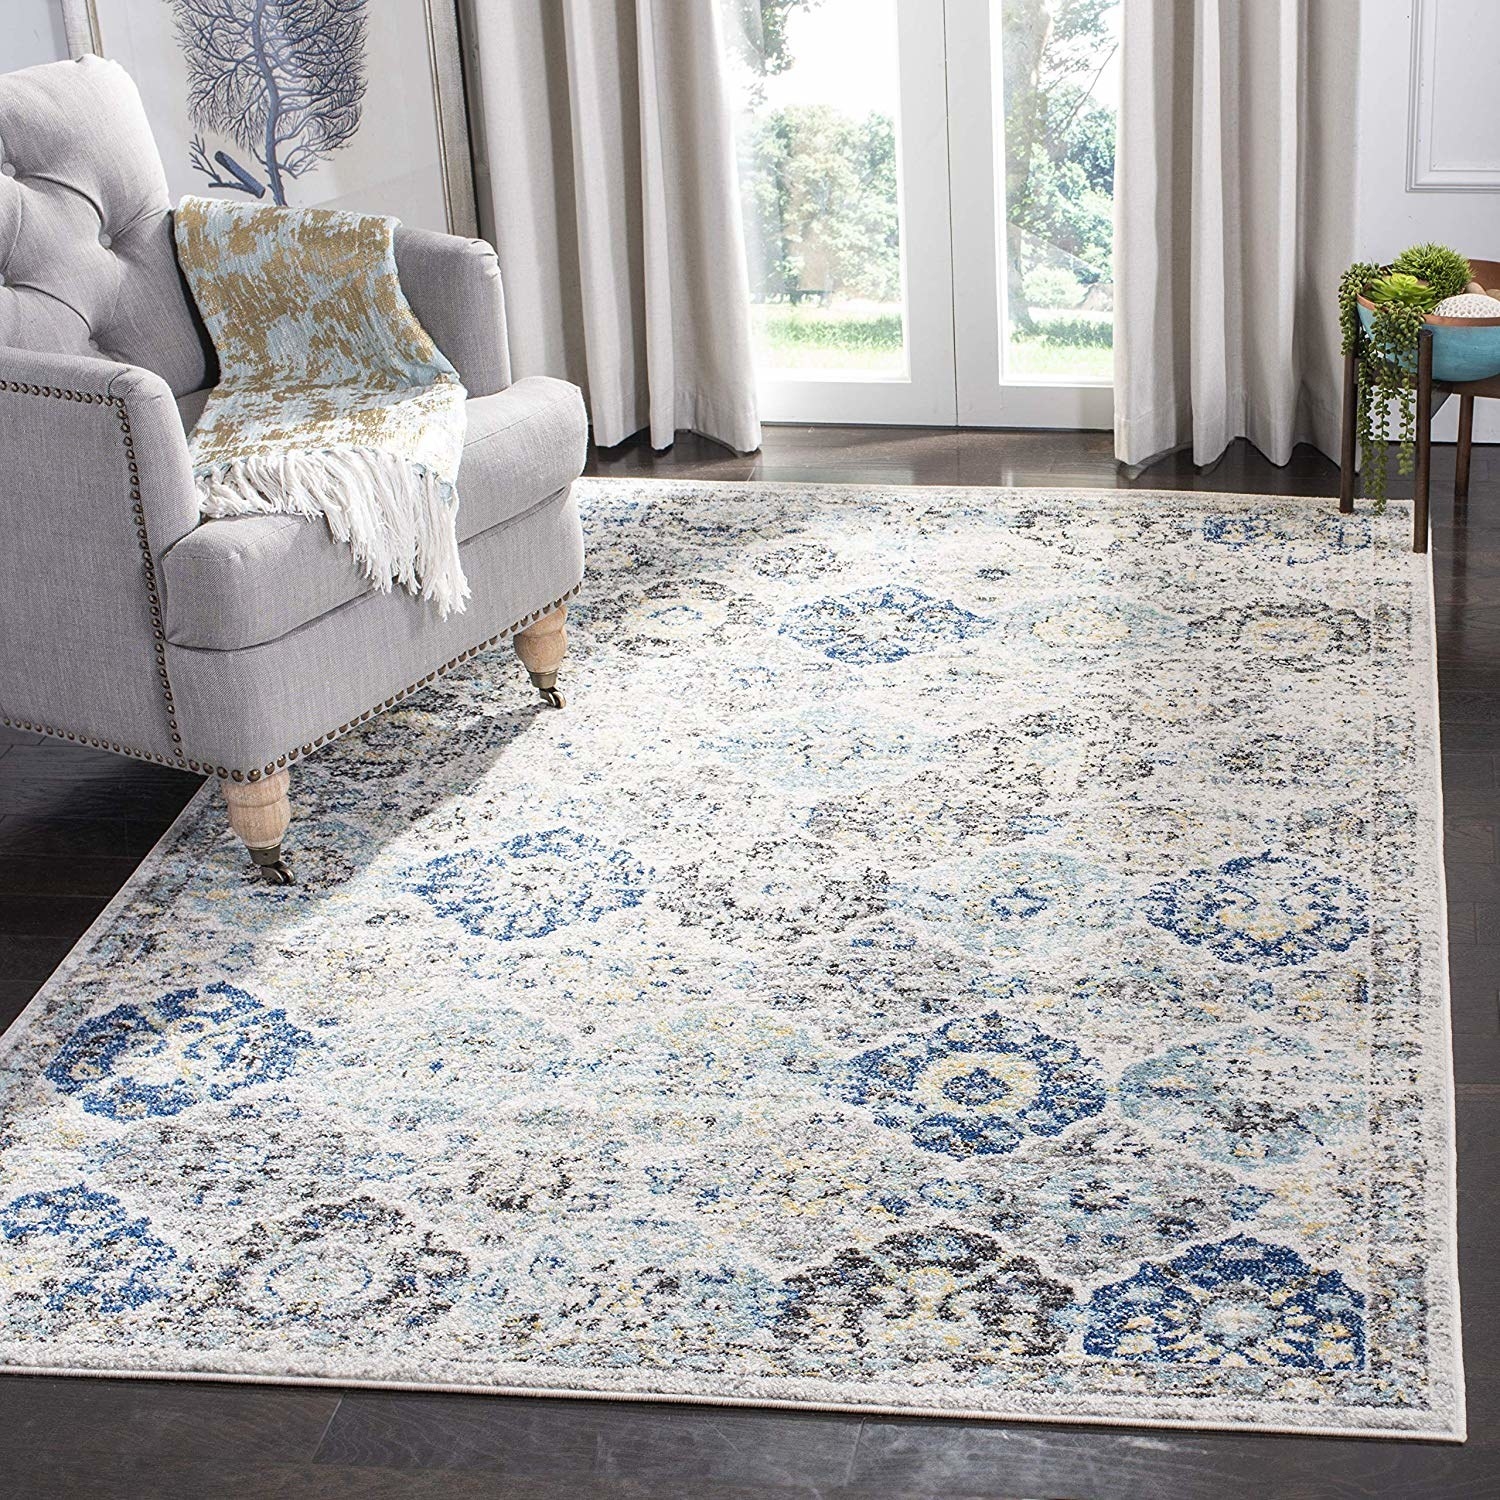 a white rug with blue and gray designs on it